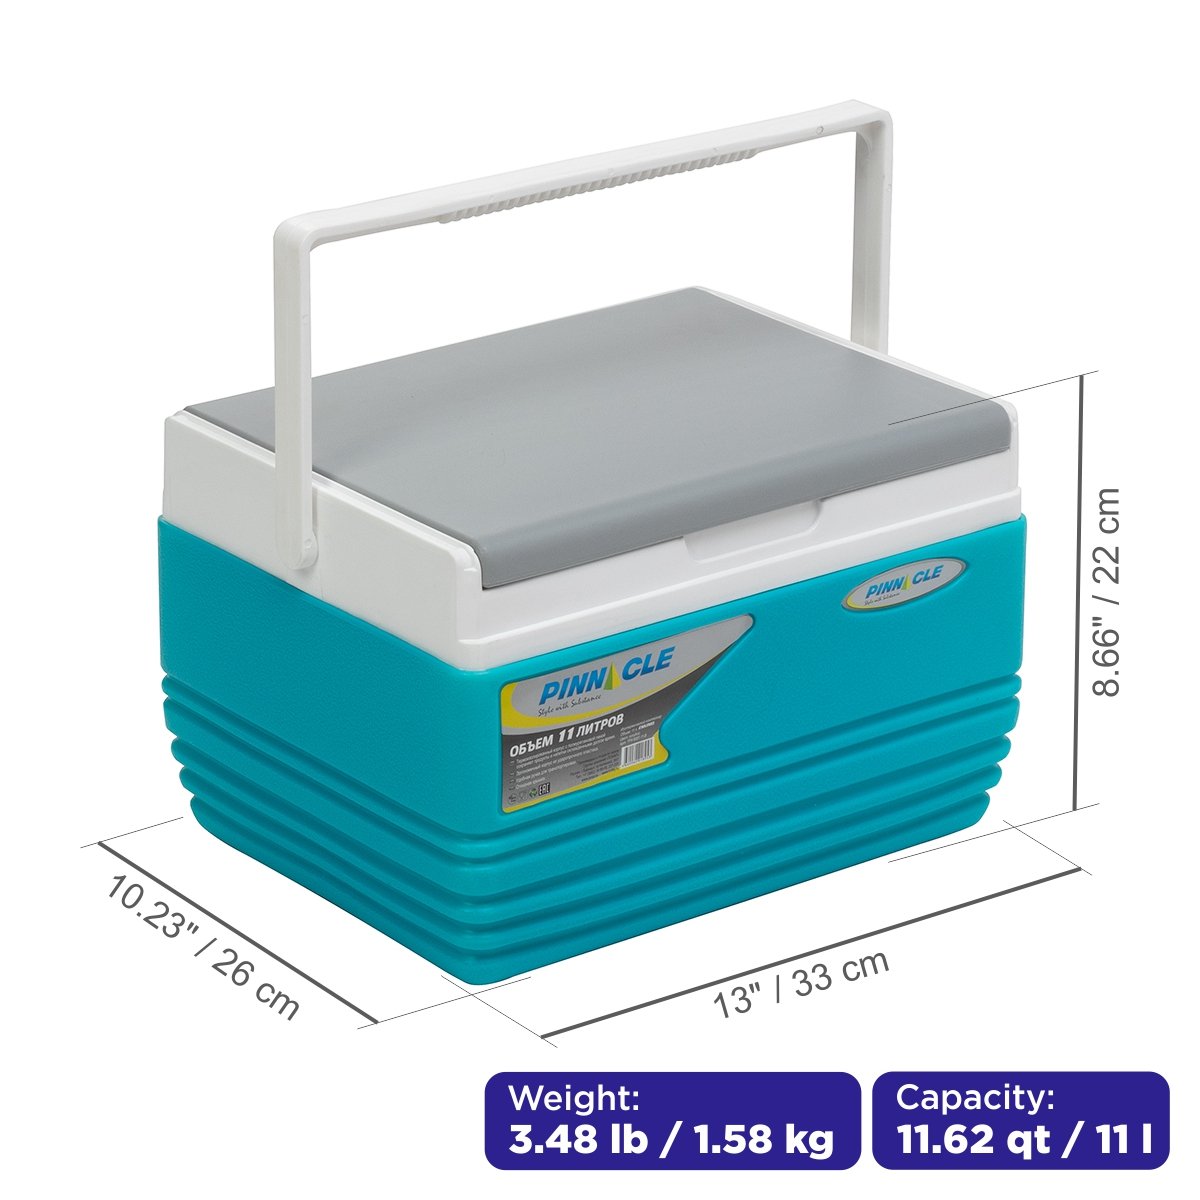 Eskimo Portable Hard-Sided Ice Chest for Camping, 11 qt, Blue is 13 inches long, 10.2 inches wide and 8.7 inches high, weighing 3.5 lbs